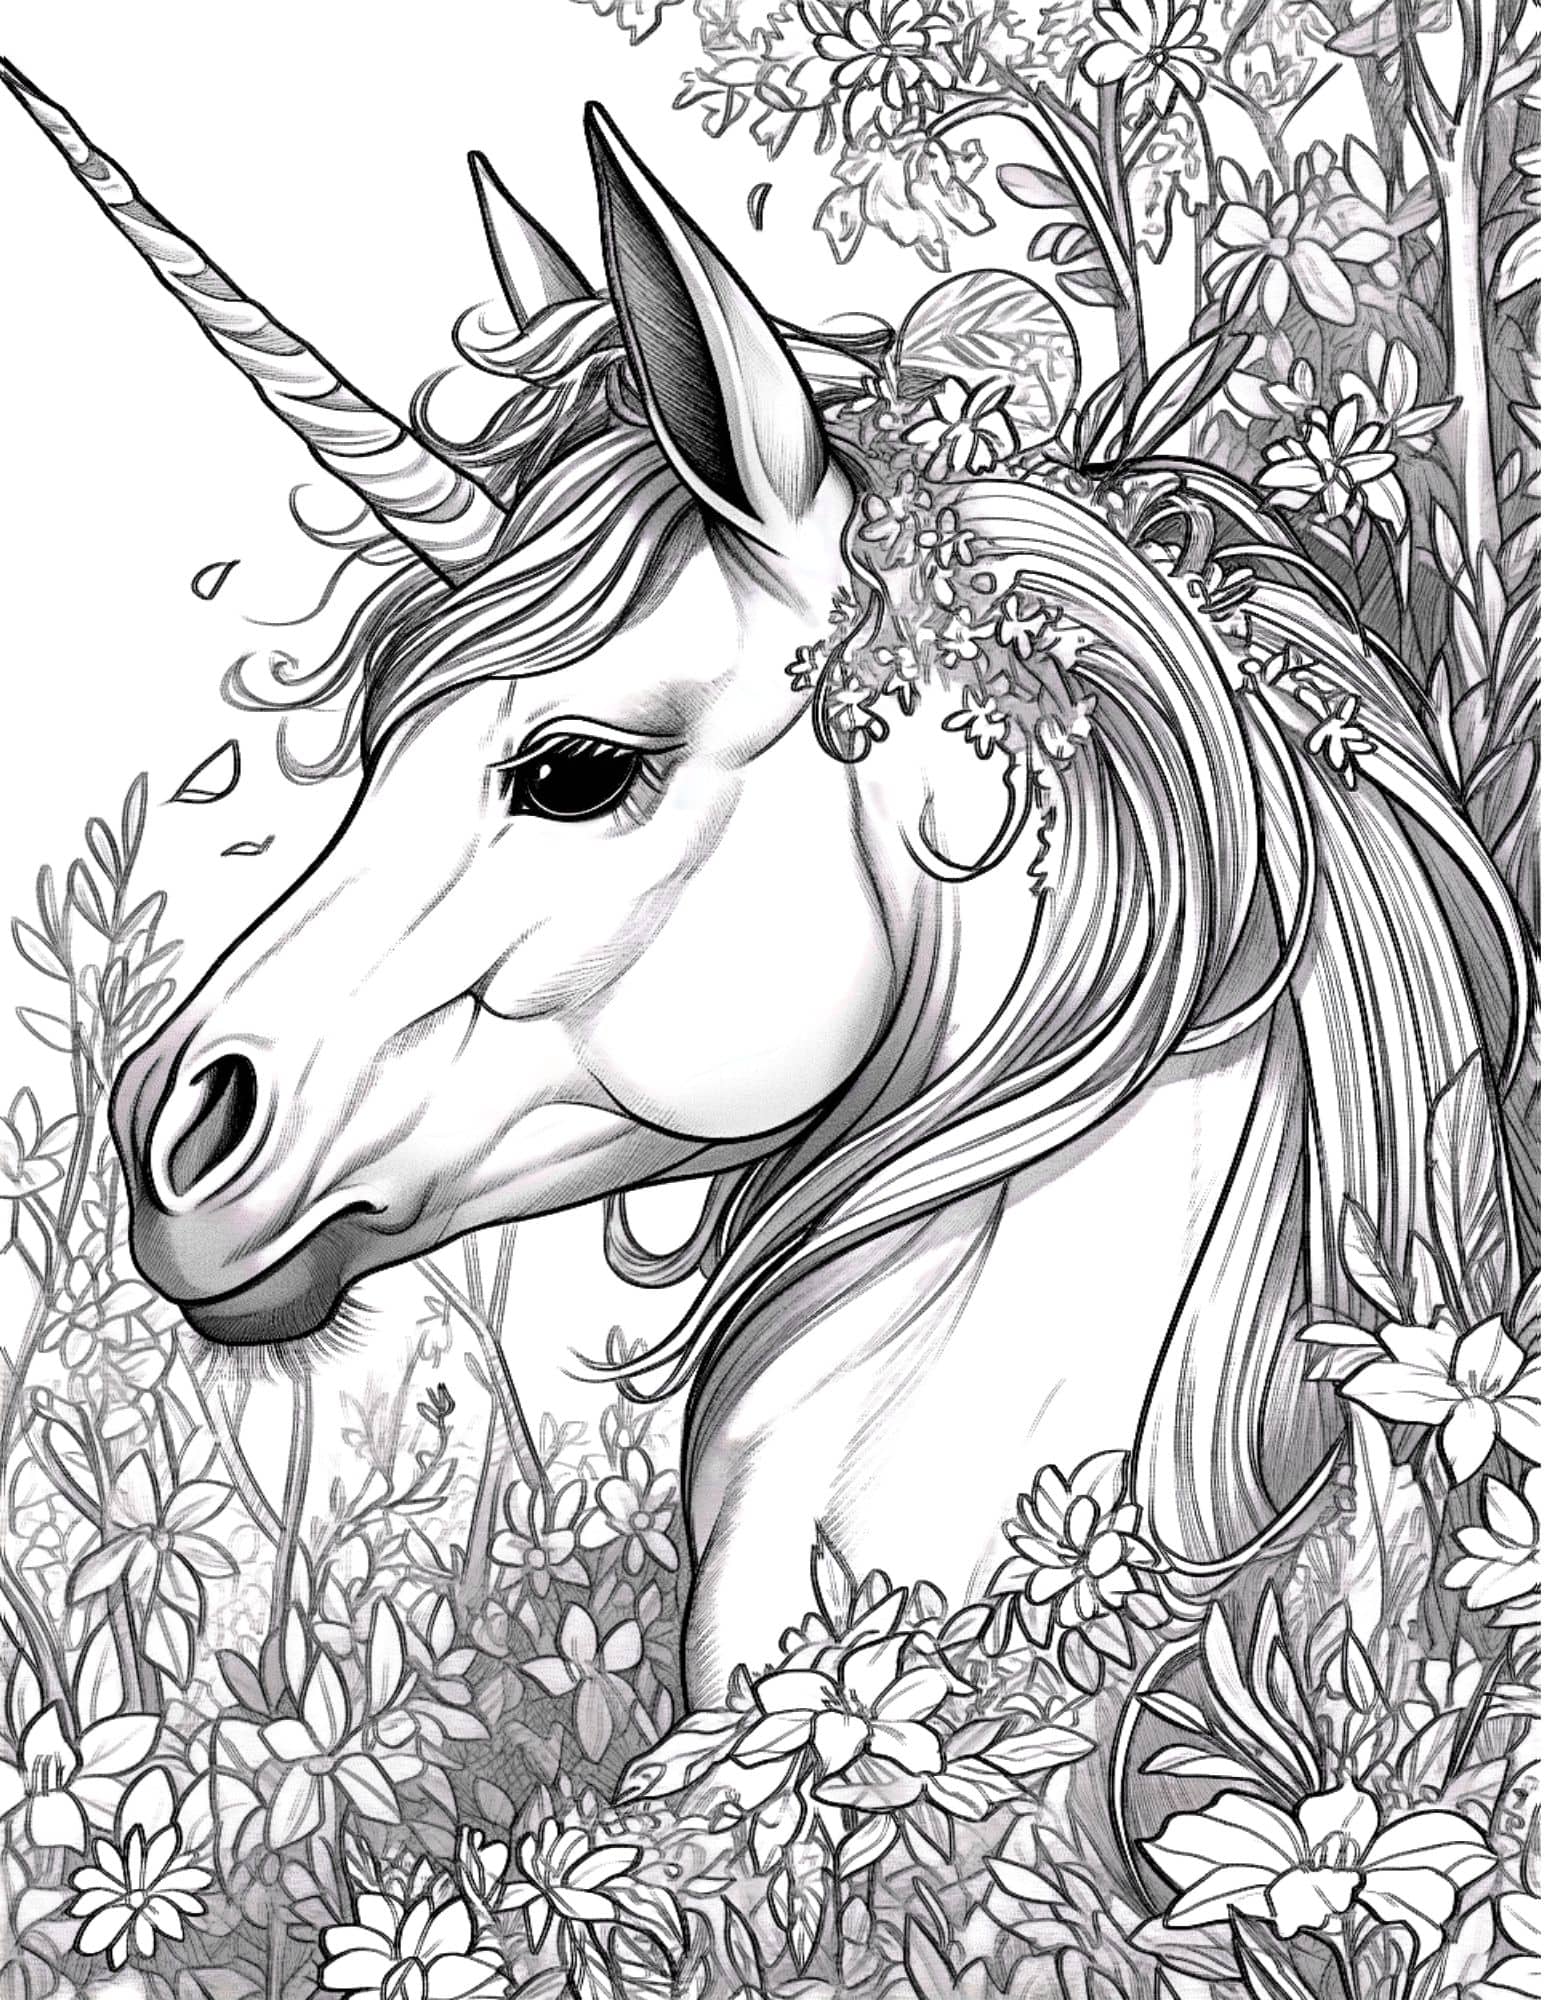 Magical unicorn coloring pages for kids and adults